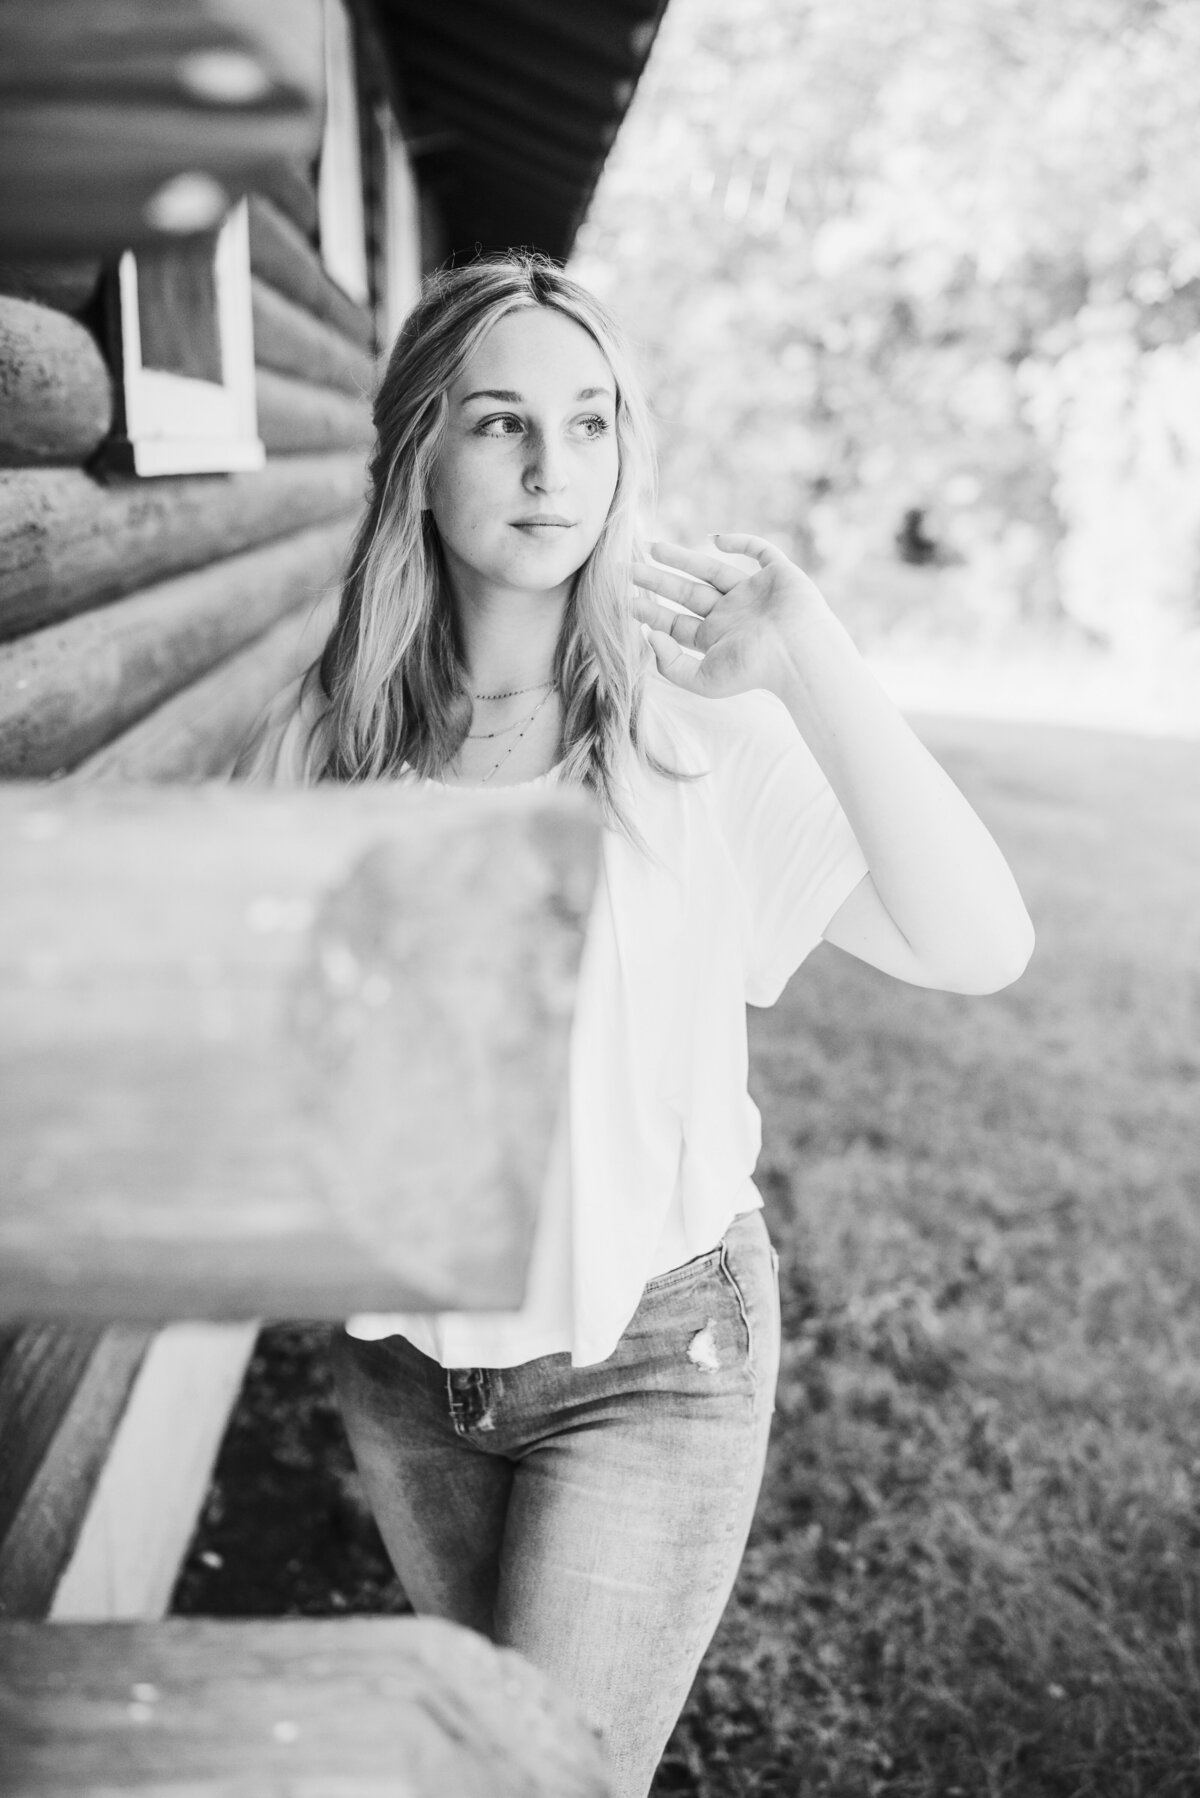 Feel the whispers of the wind in senior portraits set against expansive open fields. Shannon Kathleen Photography captures the free-spirited essence of your senior year. Book now.